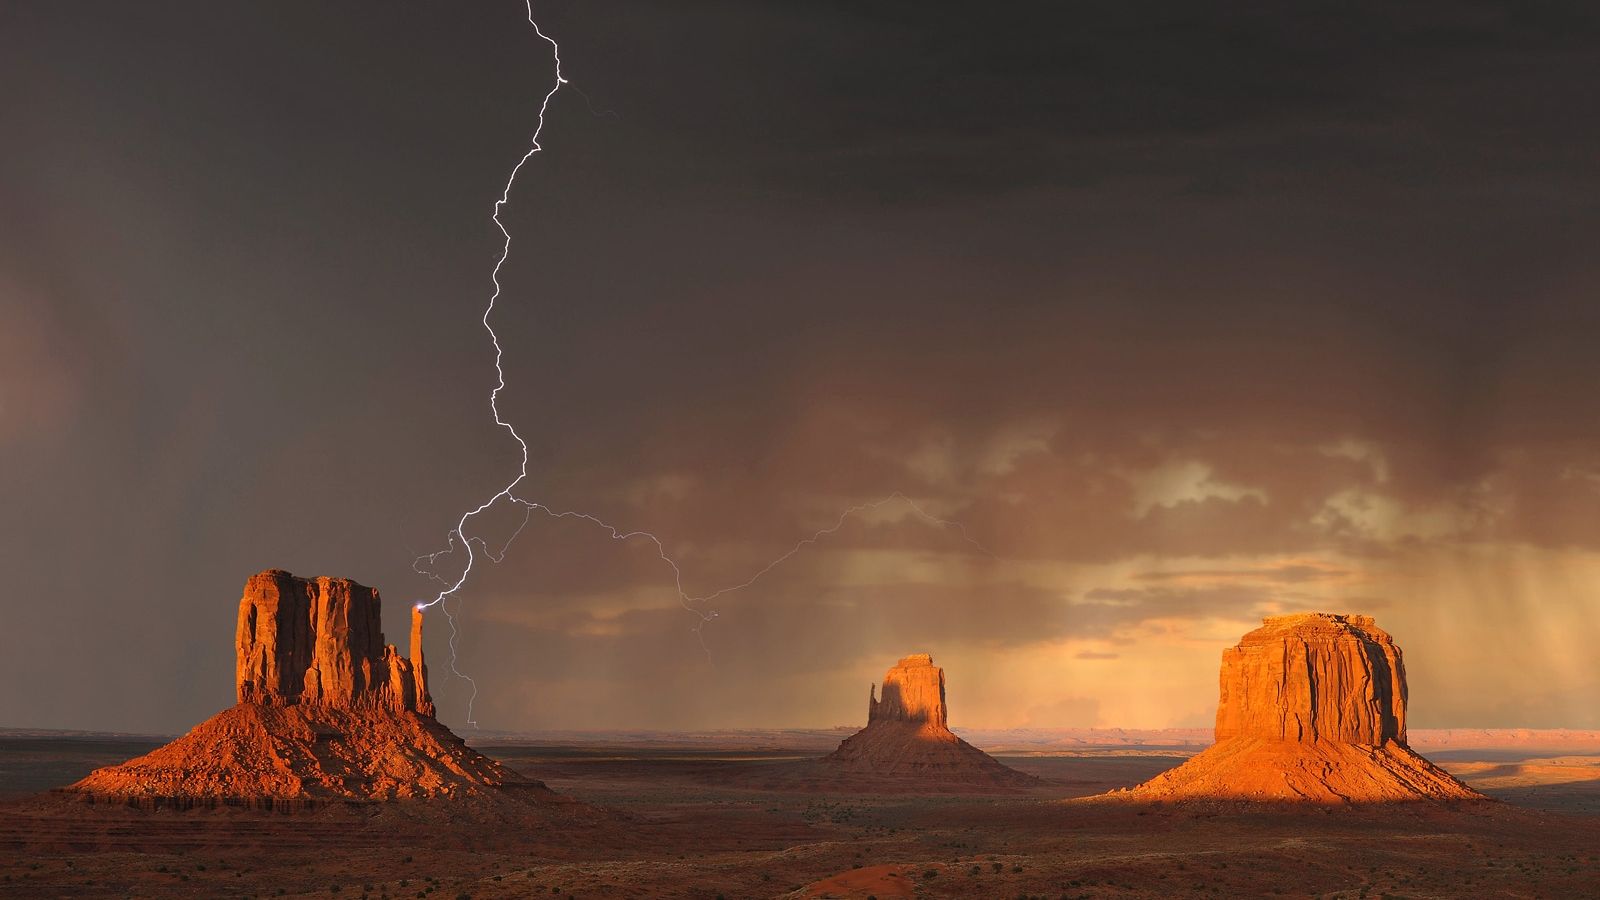 Free download Thunderstorm Over Monument Valley Navajo Tribal Park